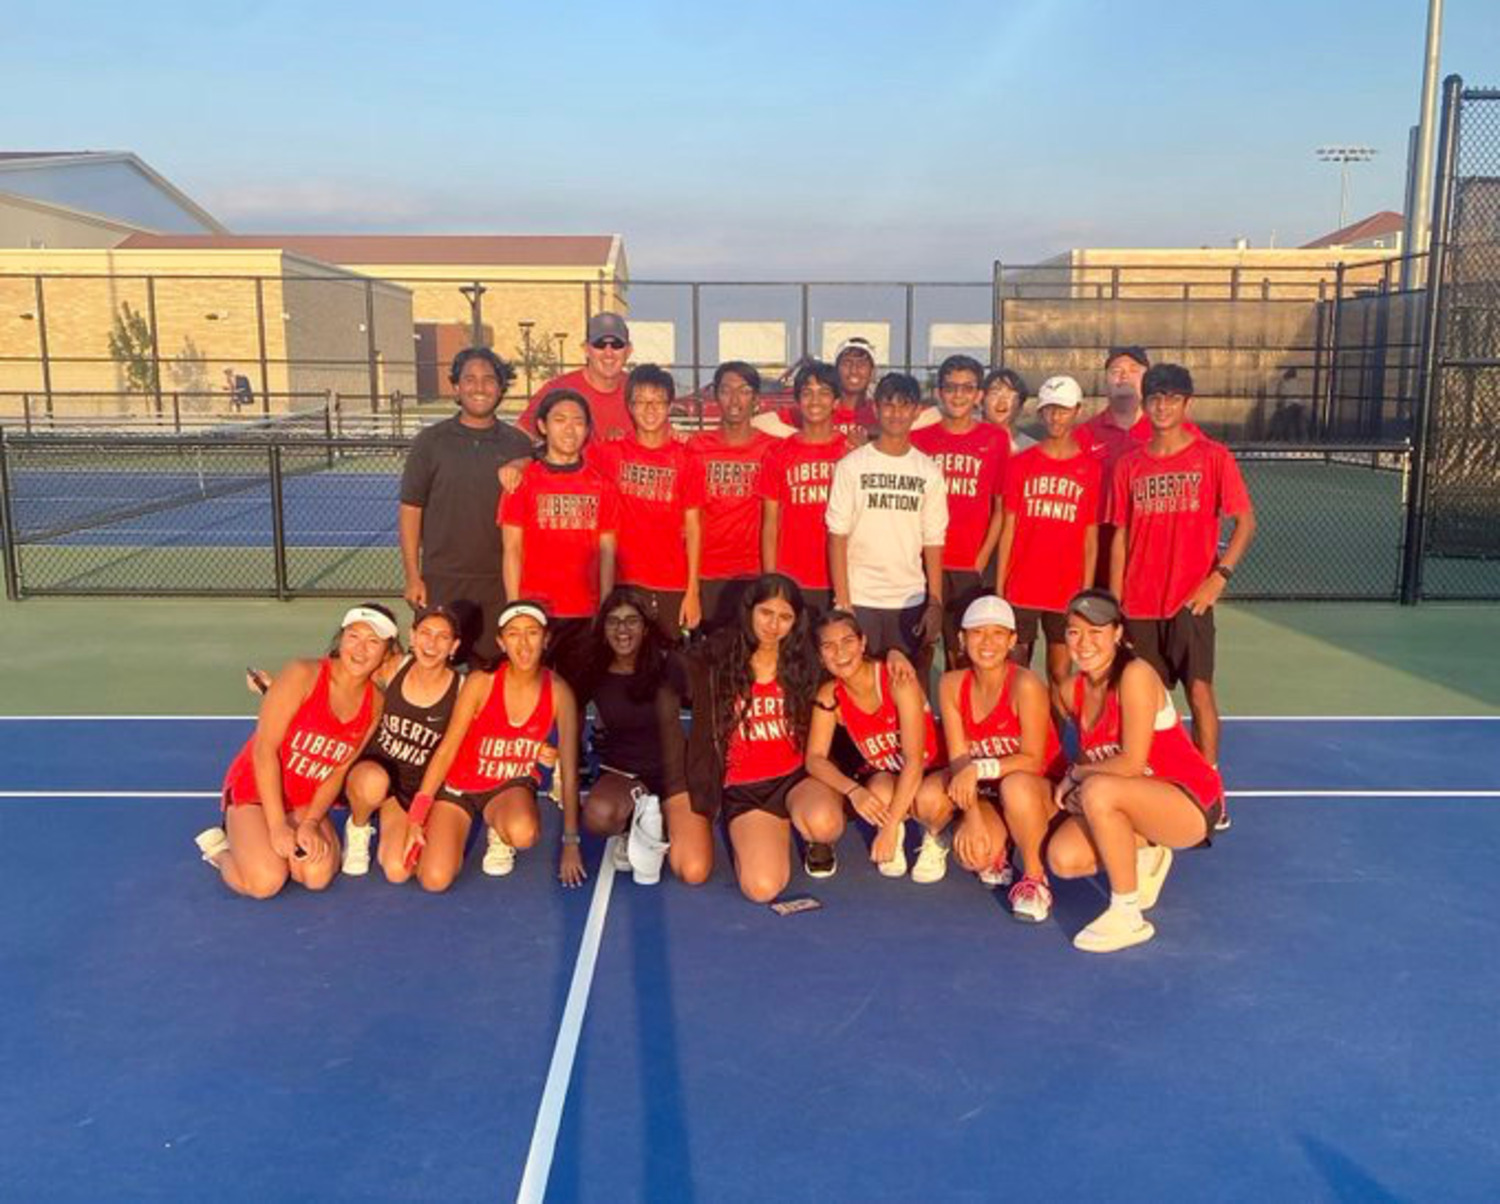 Tennis clinches a playoff spot after a victory over Walnut Grove Wednesday. “It was a huge win,” head tennis coach William Davis said.